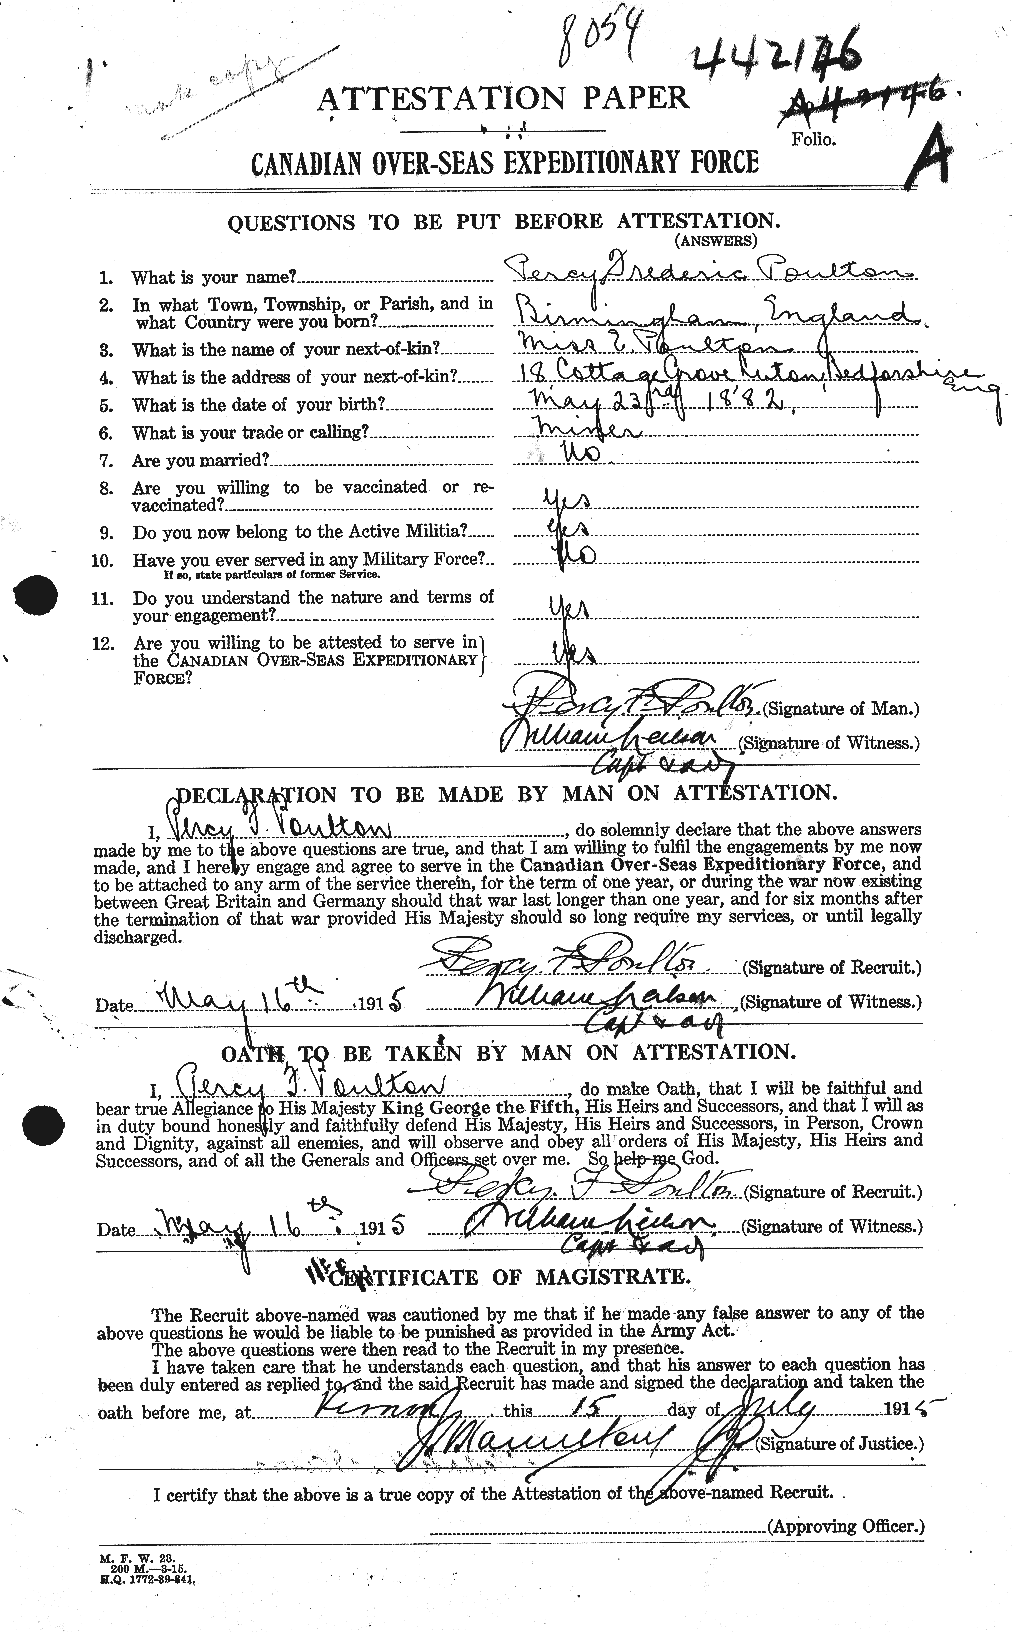 Personnel Records of the First World War - CEF 584941a